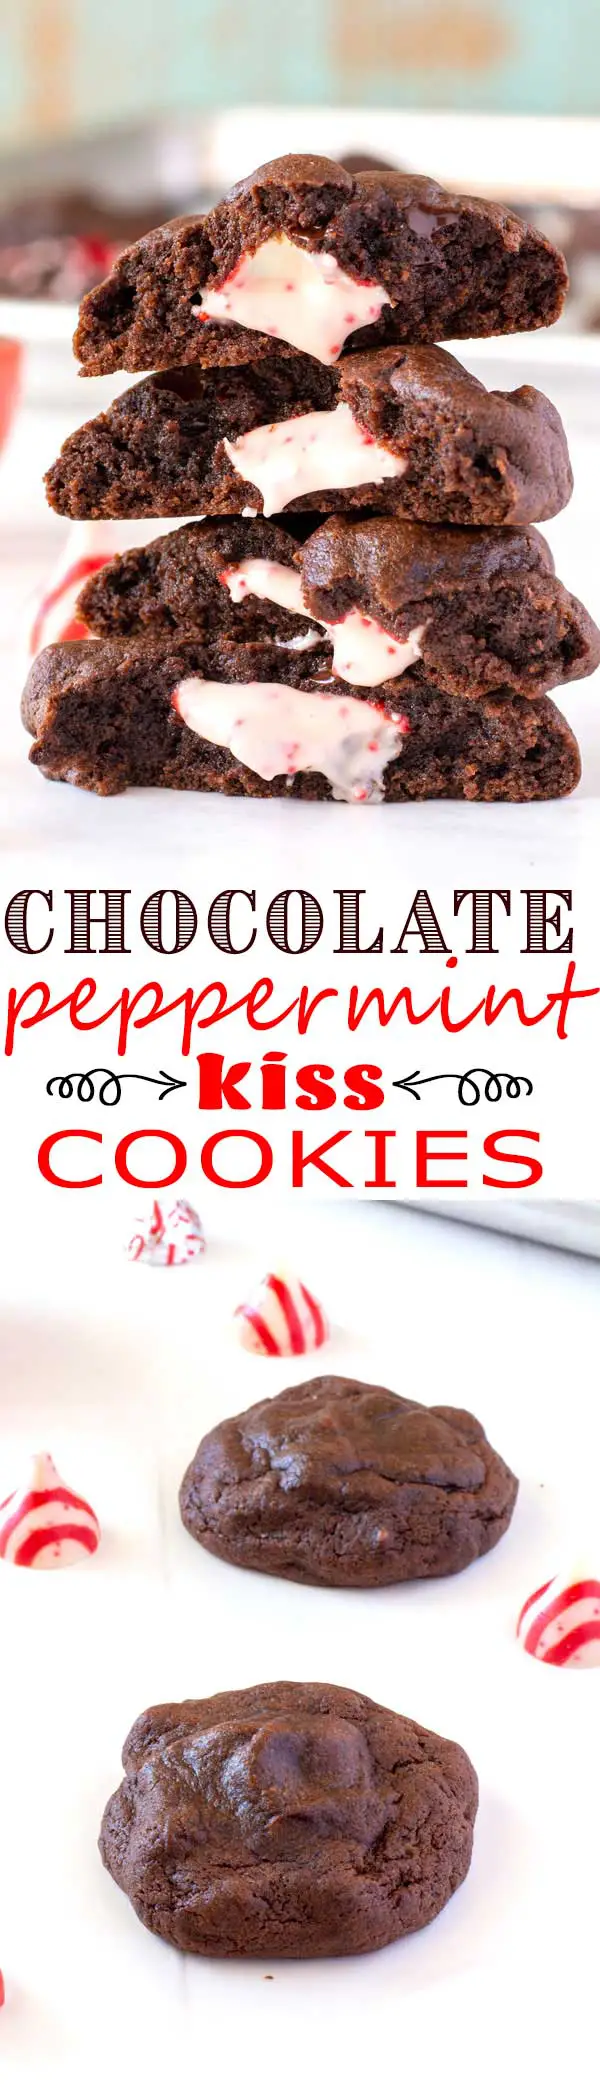 Candy Cane Kiss Cookies recipe - white chocolate peppermint kisses stuffed inside the most fudgy chocolate cookies! #christmas #christmascookies